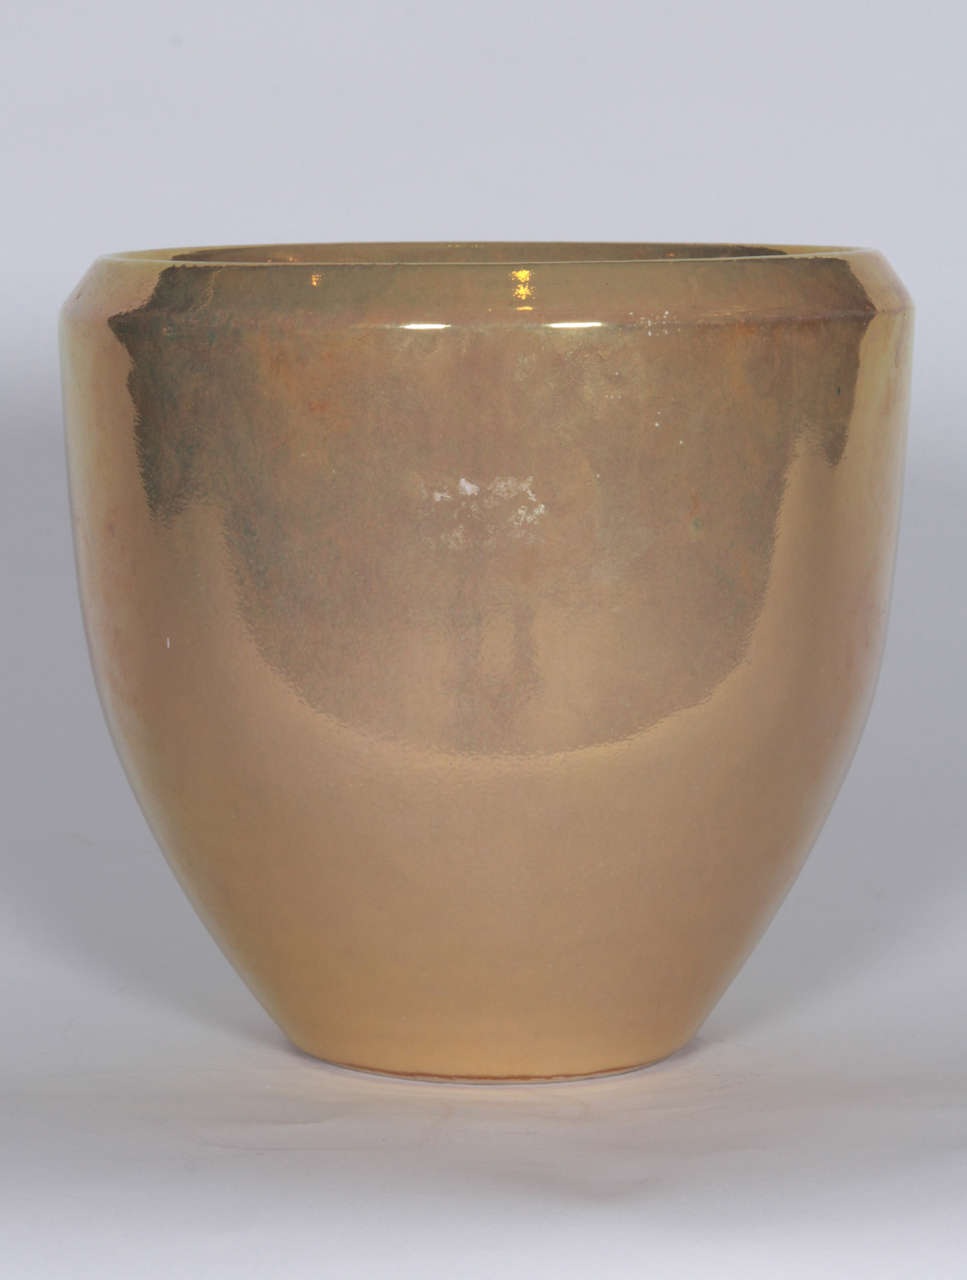 Metallic gold ceramic planter. European, circa 1960.  Perfectly proportioned to hold an orchid.